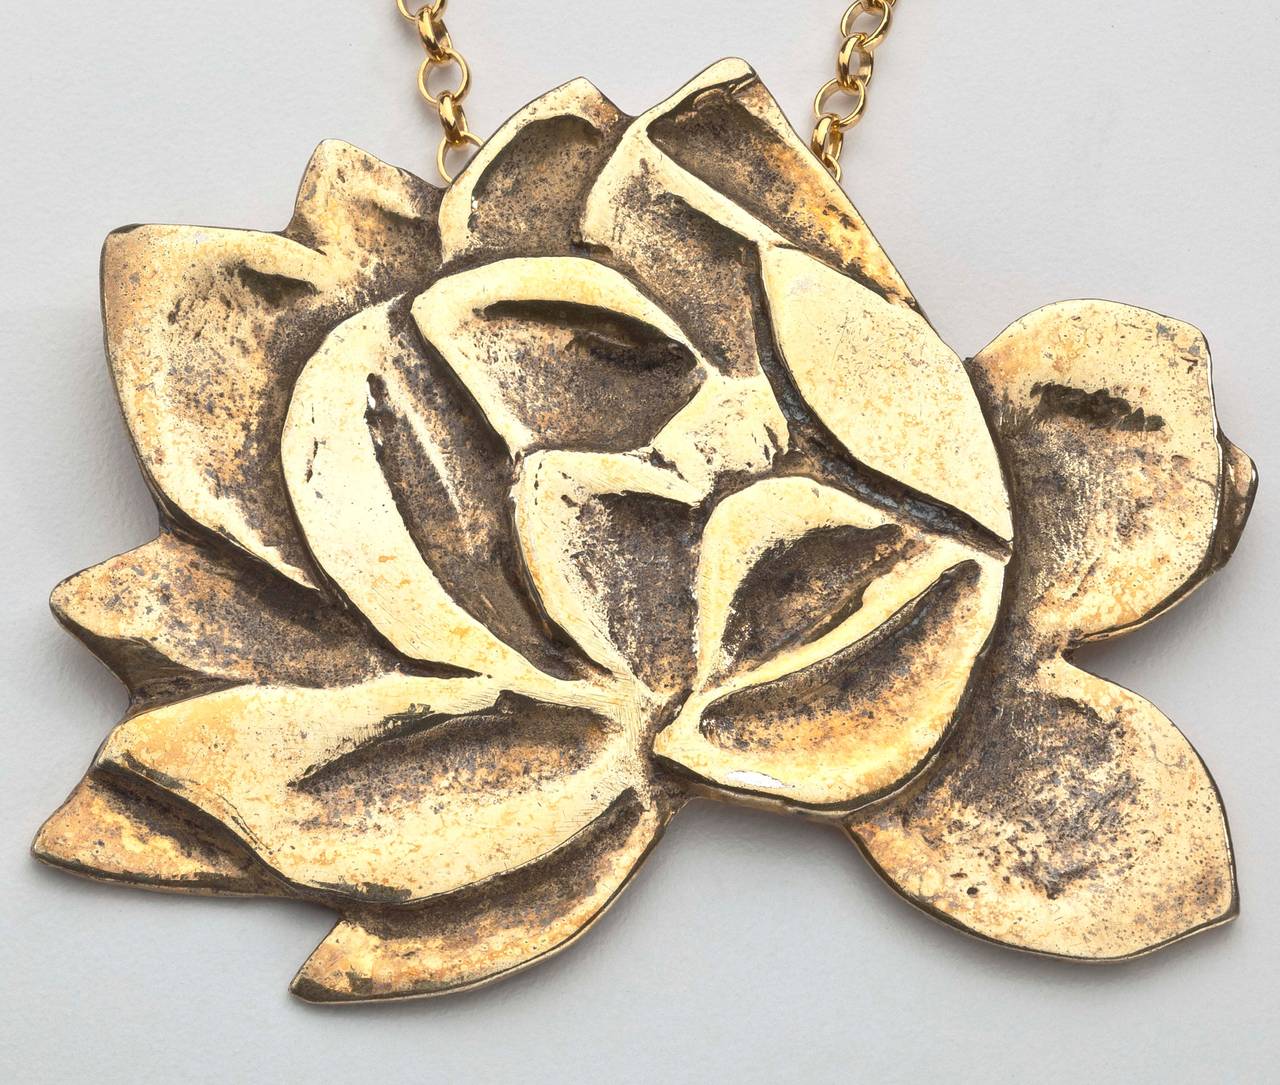 A striking flower pendant/brooch in gilt metal by Lowell Nesbitt (Born Baltimore 1933- Died 1993).  Nesbitt was a highly celebrated American artist of the Photo Realist movement of the 1960's-1970's.  He was also considered part of the Pop Art